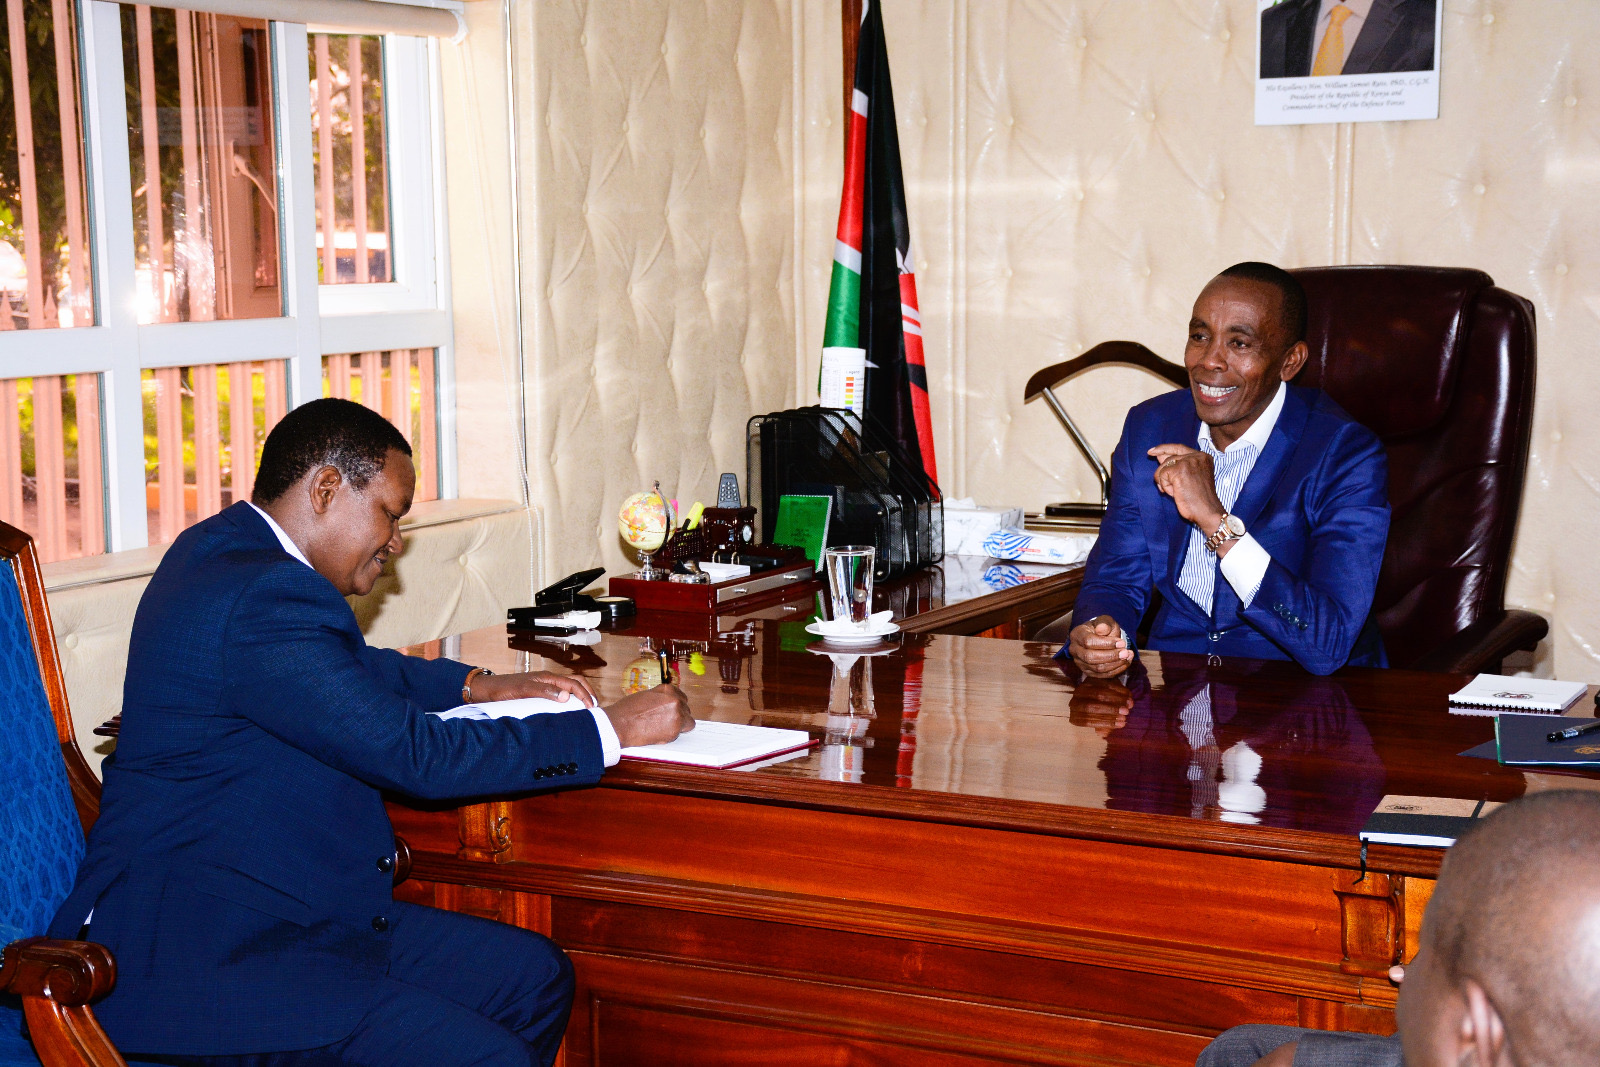 The Cabinet Secretary, Ministry of Tourism and Wildlife, Dr. Alfred Mutua (left), signs the Governor's visitors' book, as the Kiambu County Governor, H.E. Dr. Paul Wamatangi (right) looks on.